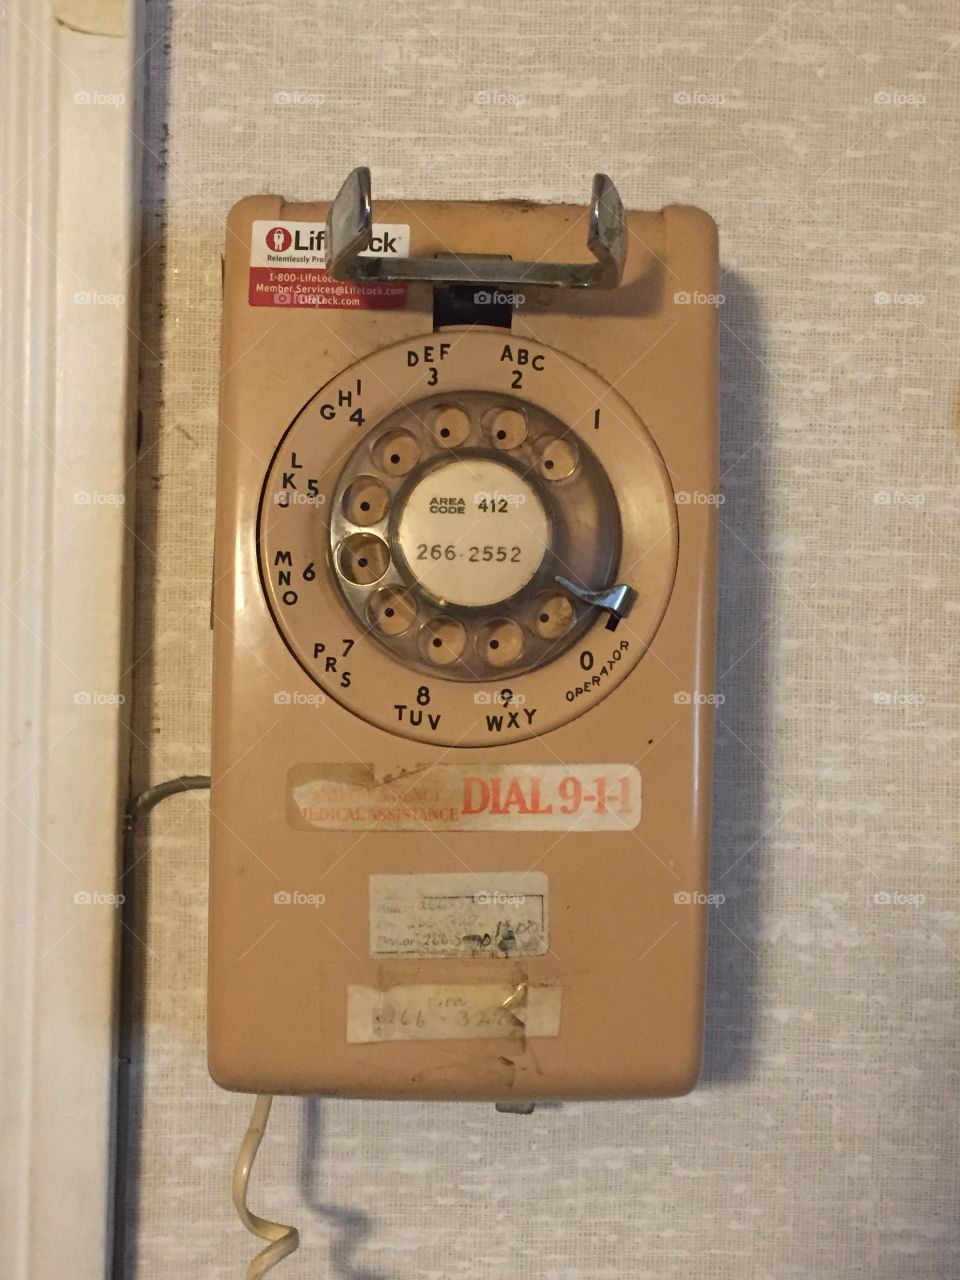 Same picture but with the dialer, hook, and numbers visible. It's neat to see faded stickers, too.